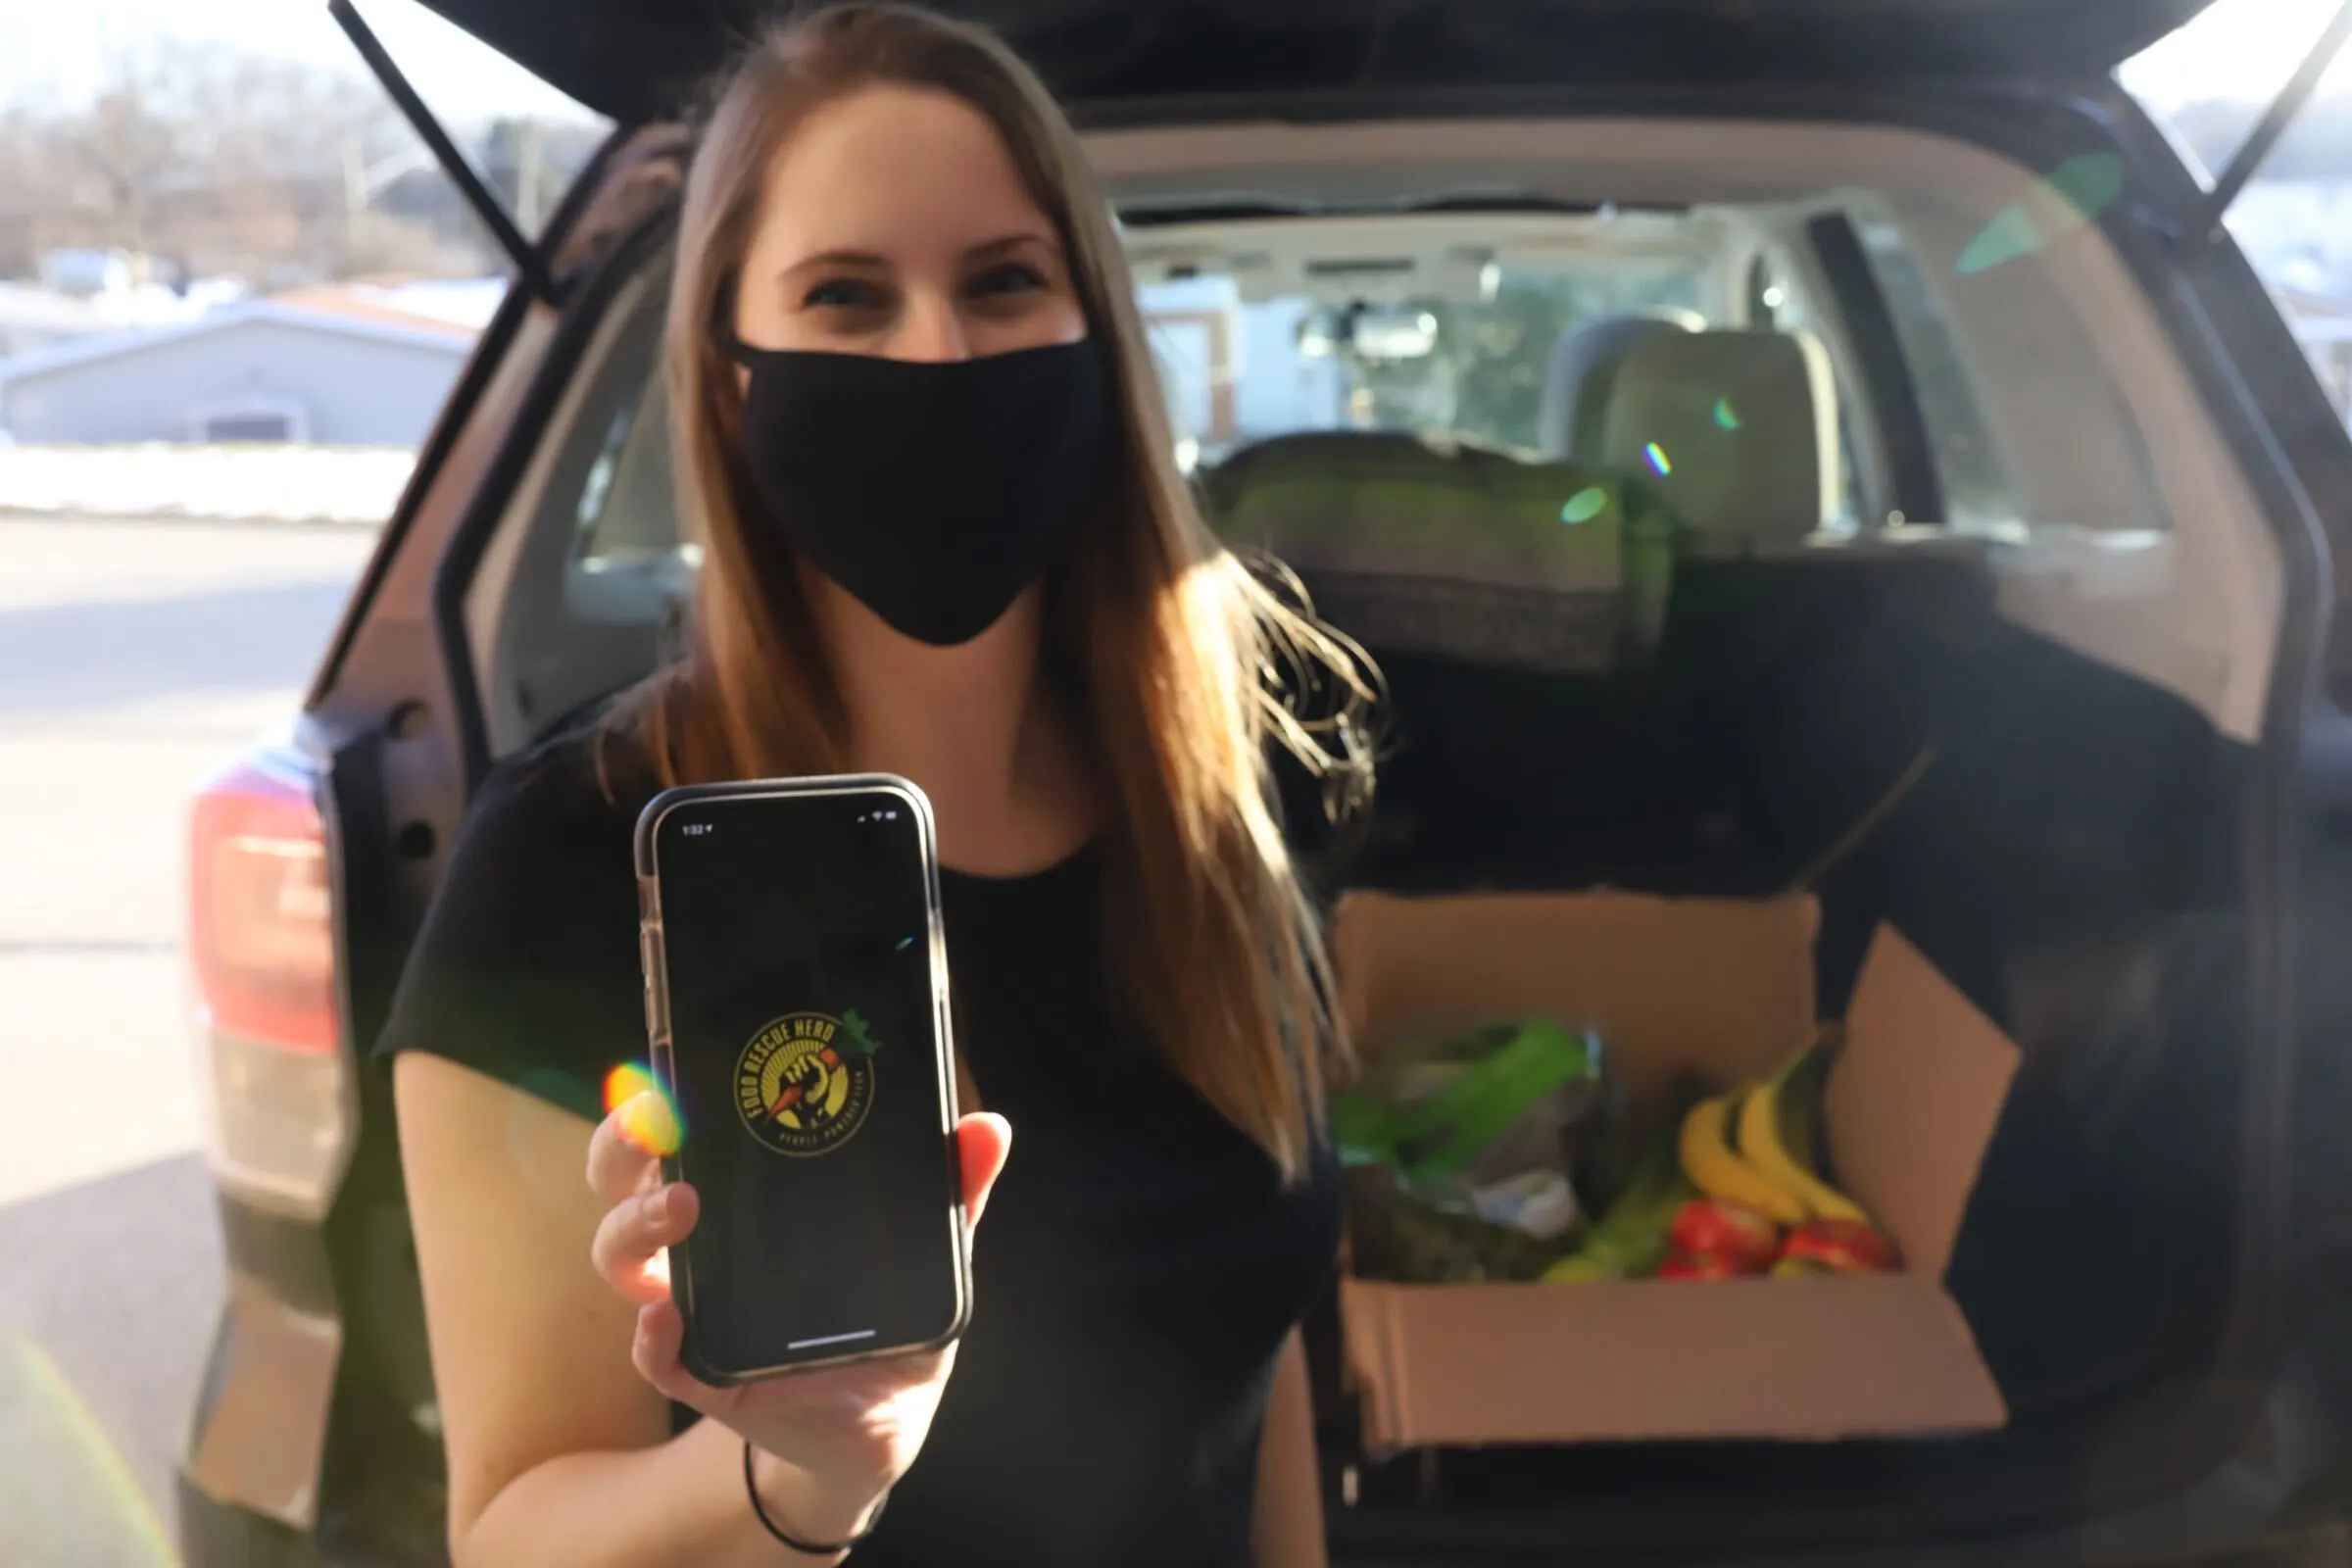 Food Rescue Hero Now Makes Home Deliveries of Potential Food Waste